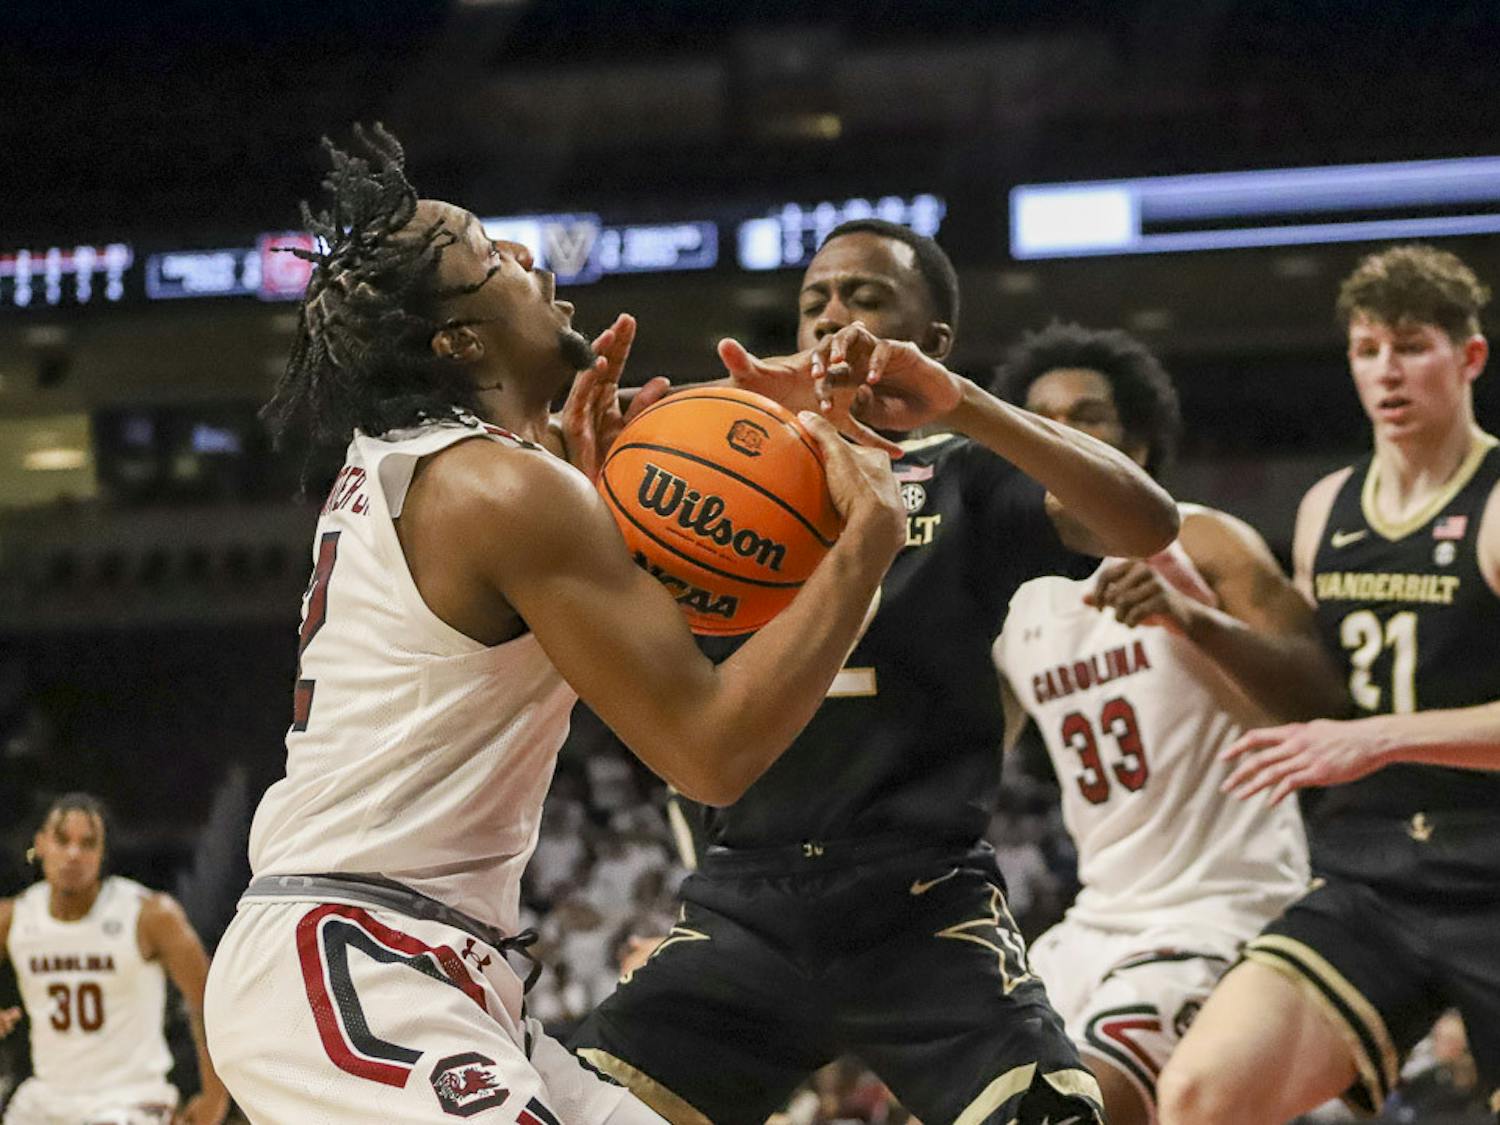 South Carolina couldn't keep up with Vanderbilt's offense during their matchup at Colonial Life Arena on Feb. 14, 2023. Both teams struggled to maintain a strong shooting game, scoring less than 40% of their field goals and 30% of their three-point shots. The Commodores beat the Gamecocks 75-64, marking this the team's seventh consecutive loss and placing them 2-11 in the SEC.&nbsp;